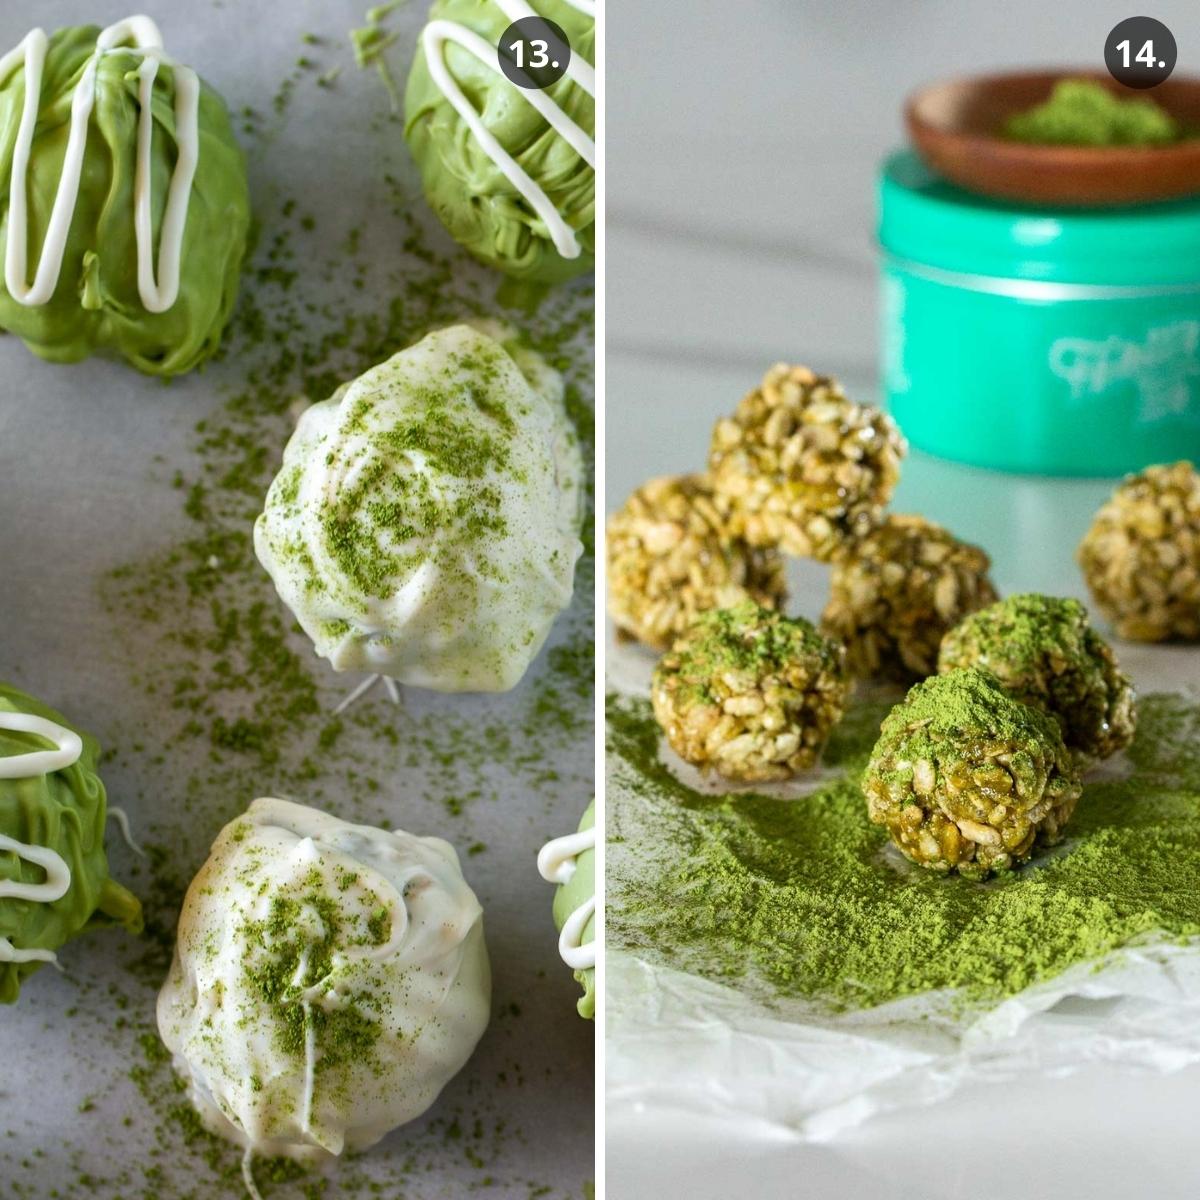 Decorating chocolate matcha crispy balls with white chocolate and some plain with just a dusting of matcha powder.